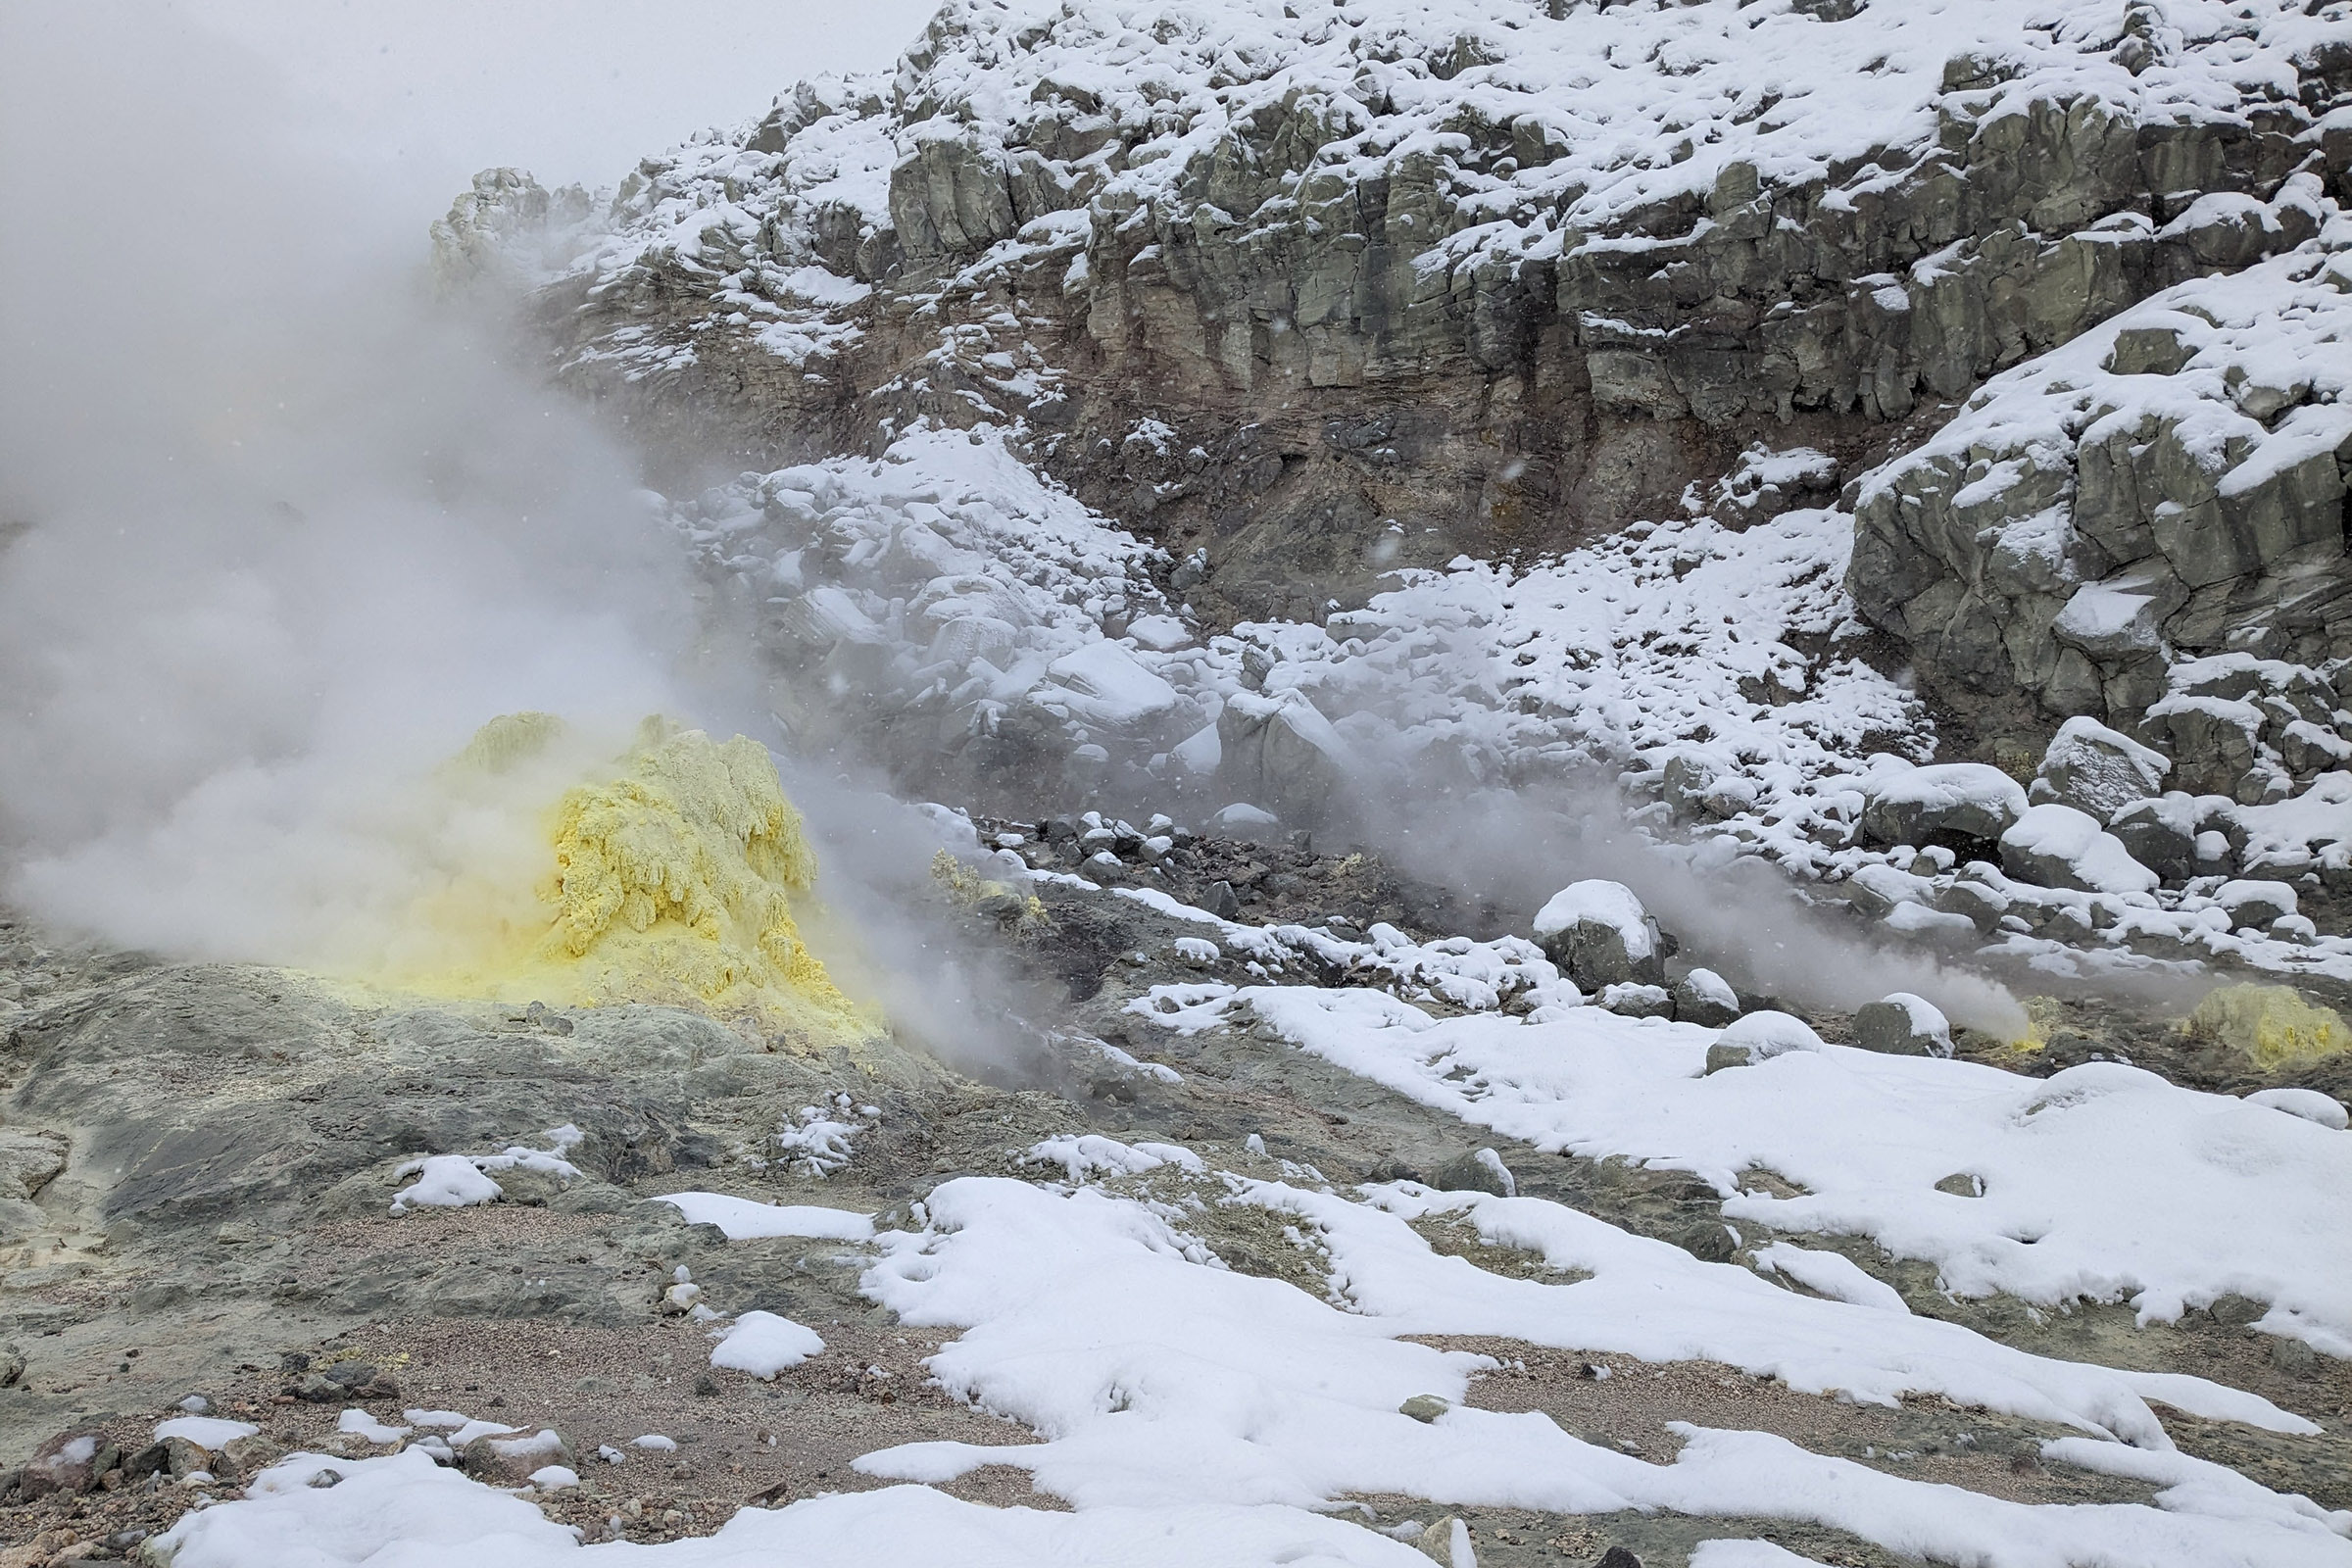 Steam rises from yellow sulphurous vents at Mt Io in the Akan–Mashu national park. The hot ground has melted the snow from around the vents.